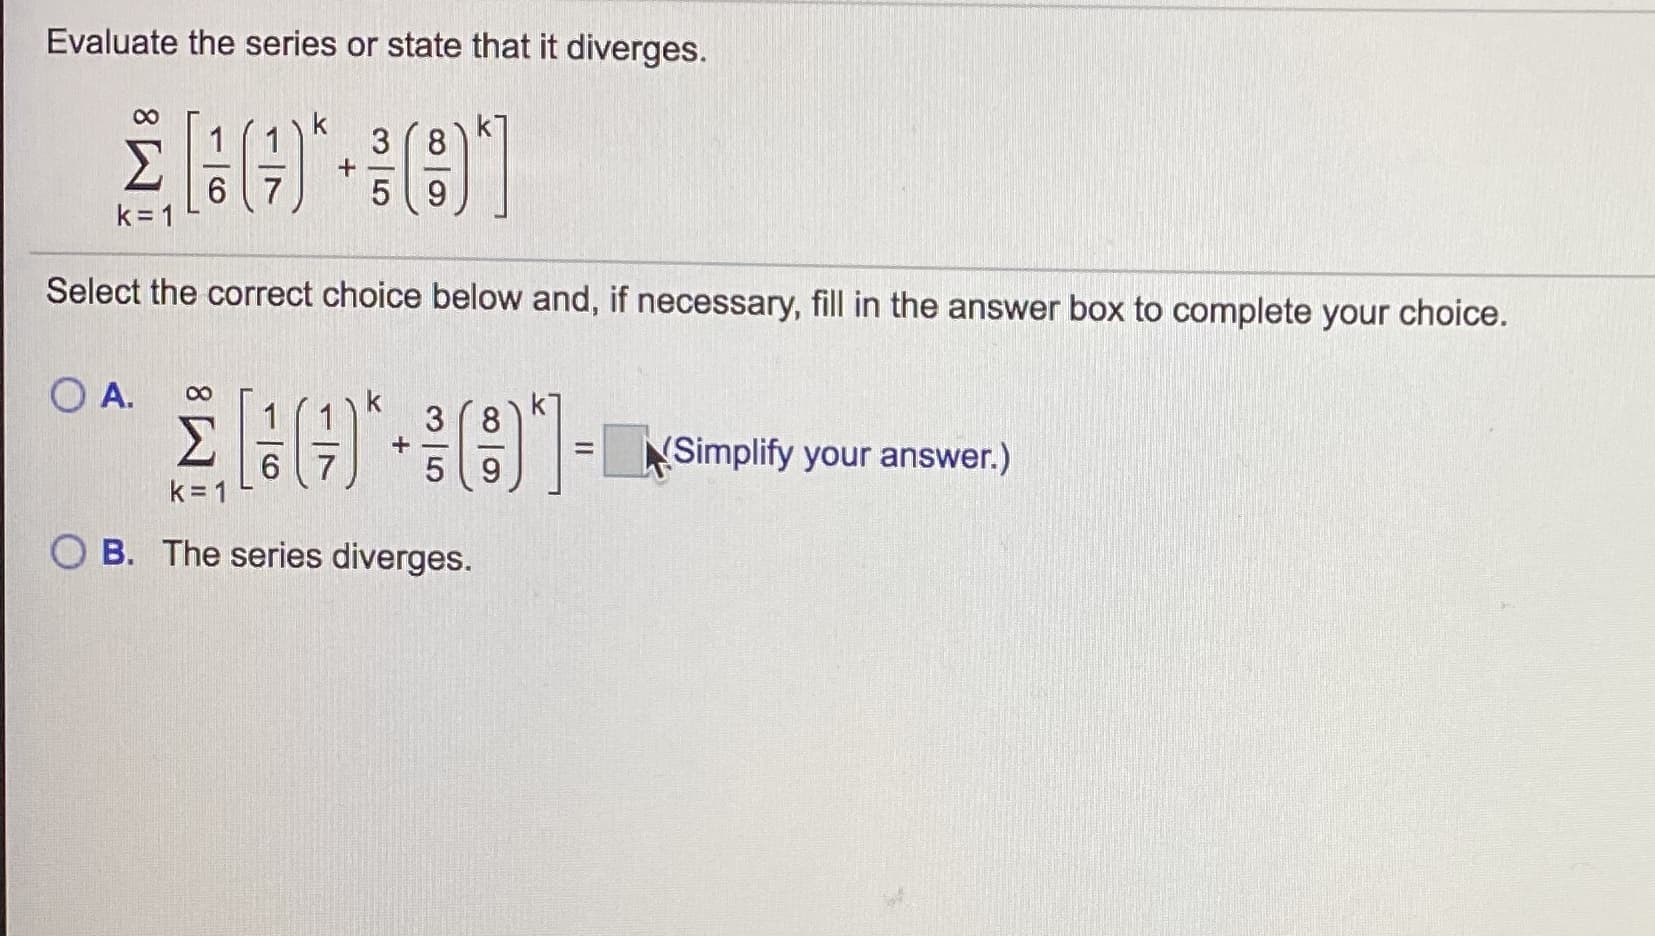 Evaluate the series or state that it diverges.
k
3 (8
6.
k= 1
9.
